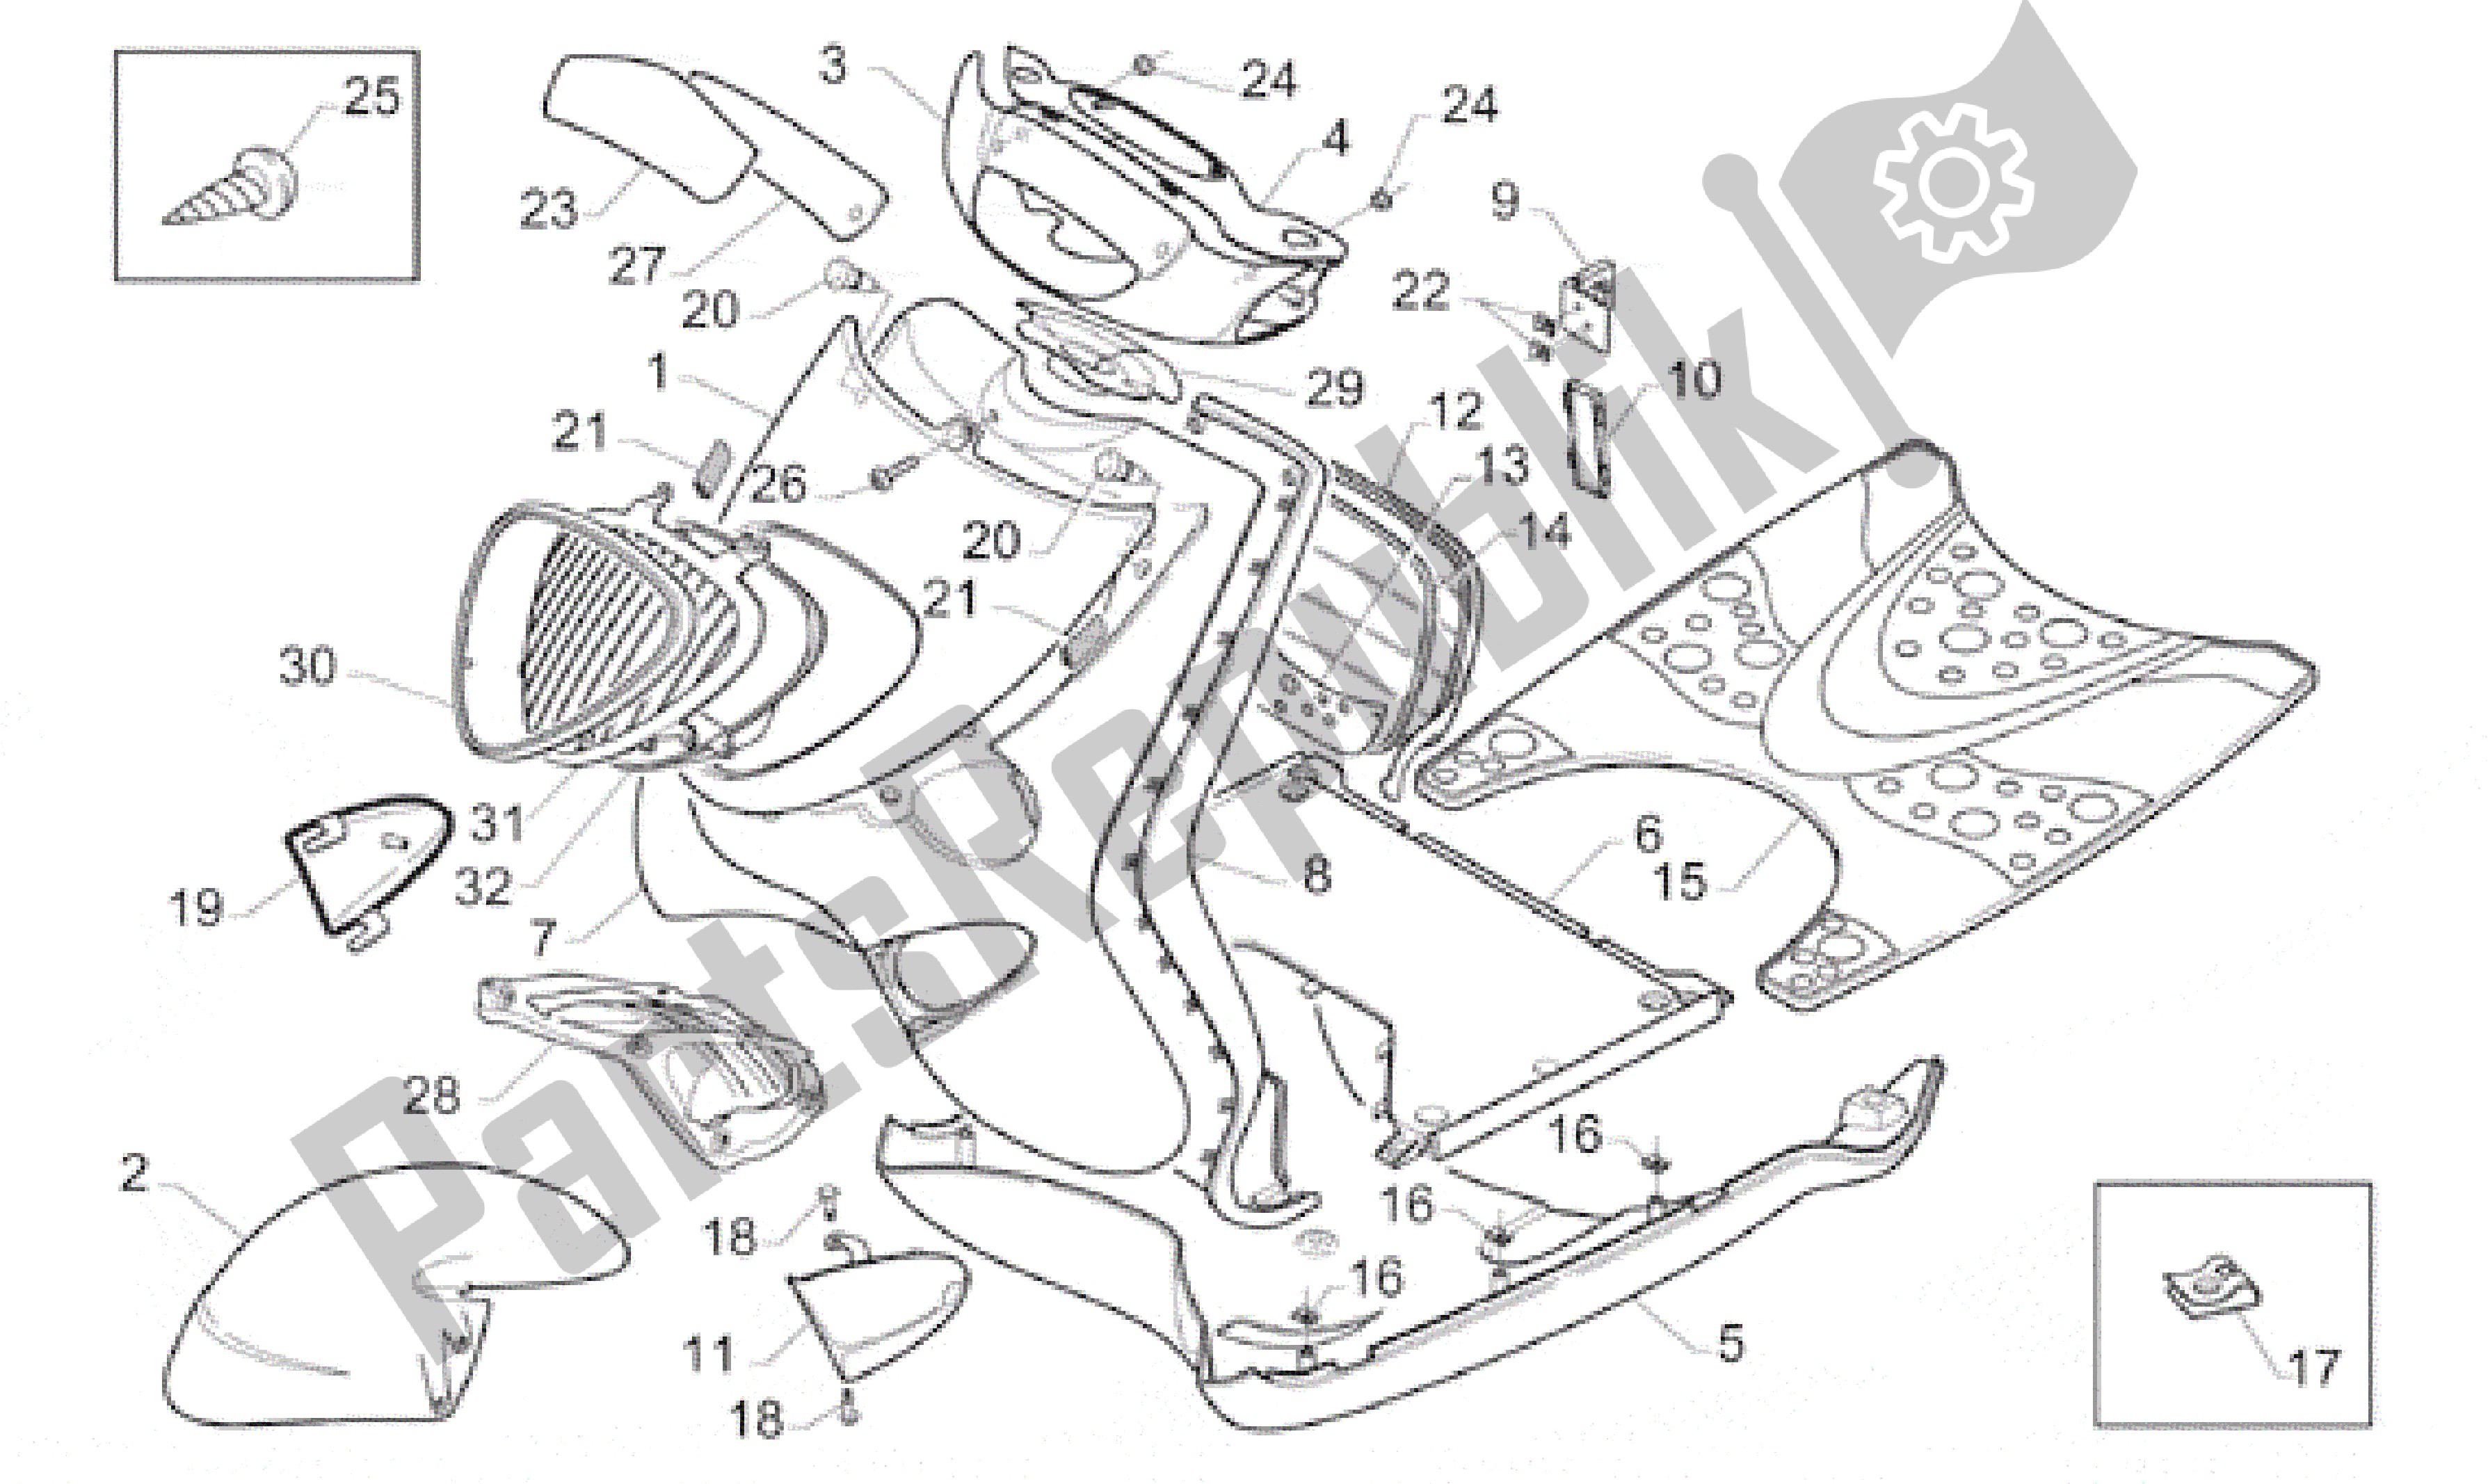 All parts for the Front Body of the Aprilia Gulliver 50 1996 - 1998